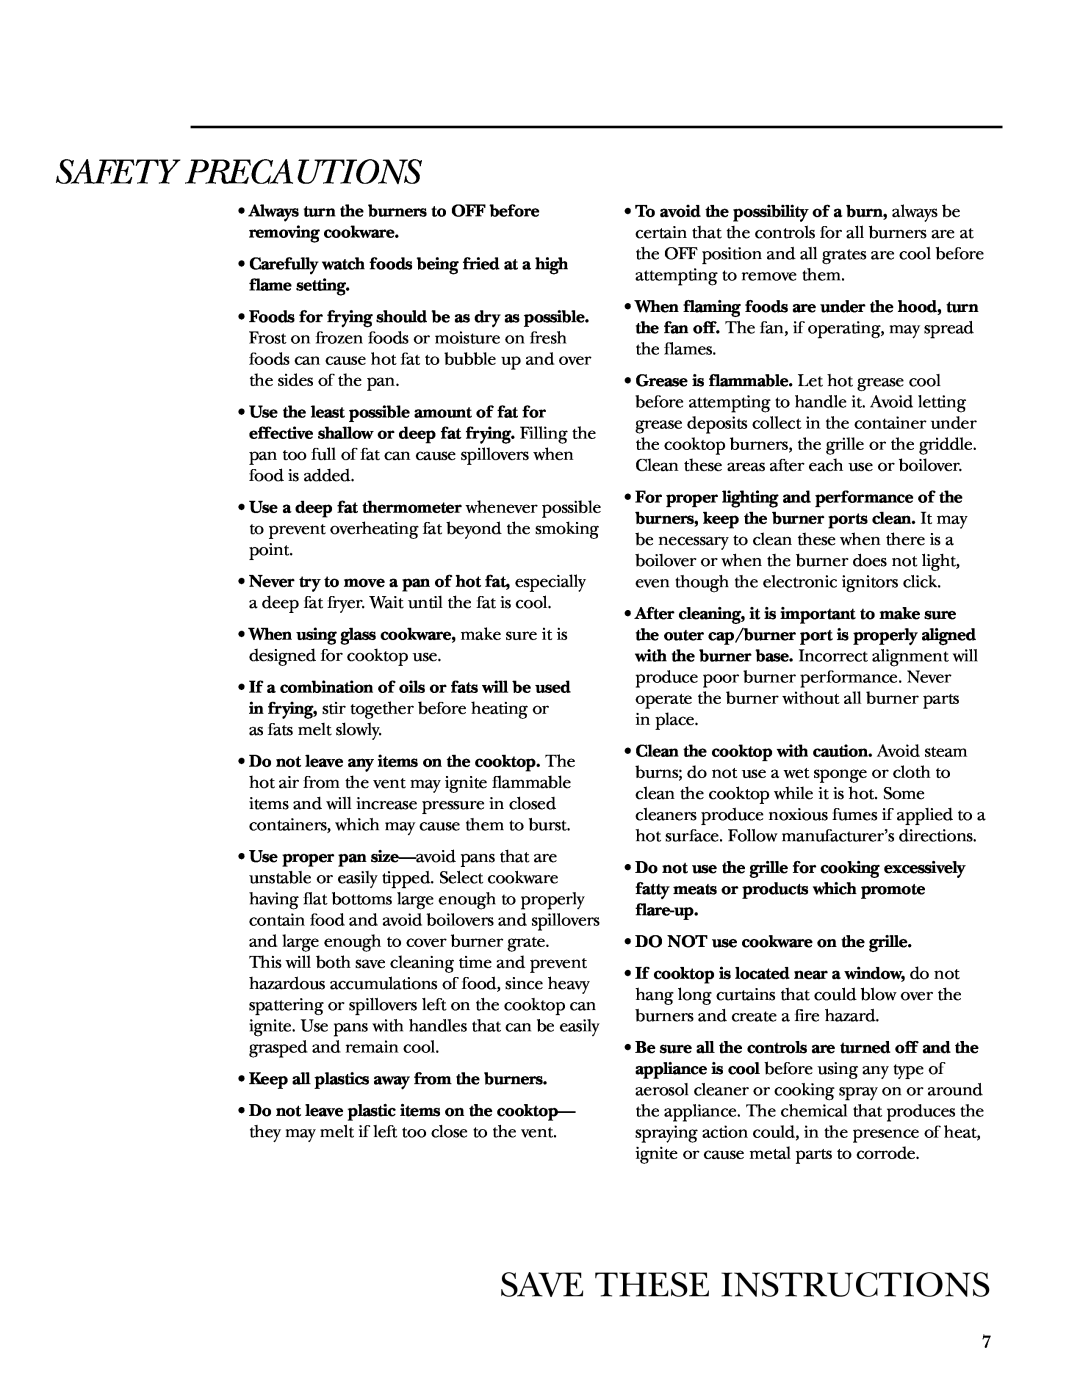 GE 36 owner manual Save These Instructions, Safety Precautions 